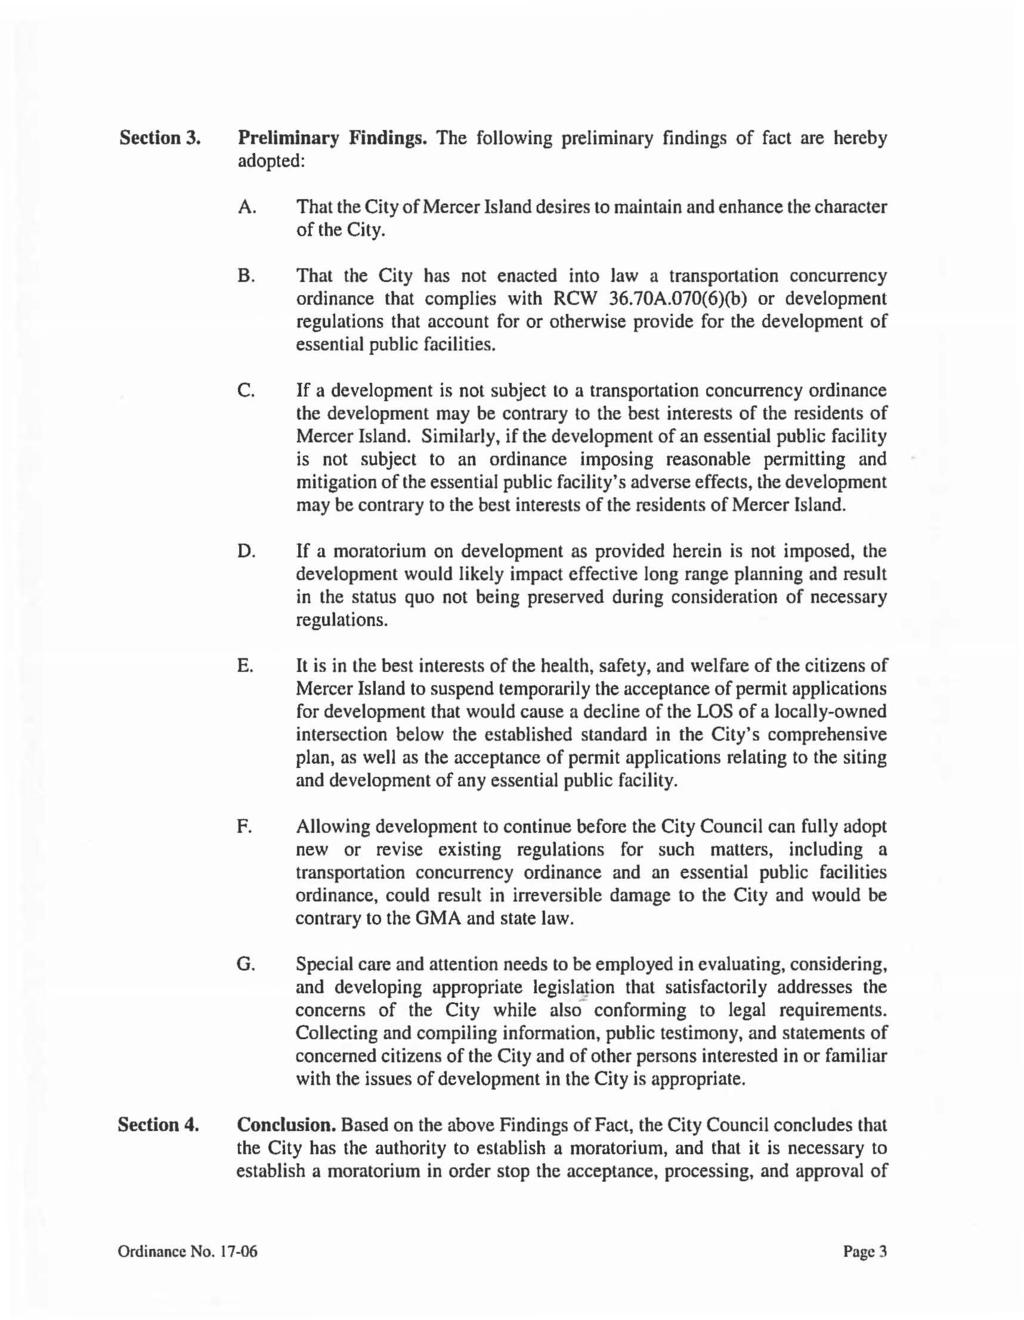 Section 3. Preliminary Findings. The following preliminary findings of fact are hereby adopted: A. That the City of Mercer Island desires to maintain and enhance the character of the City. B.